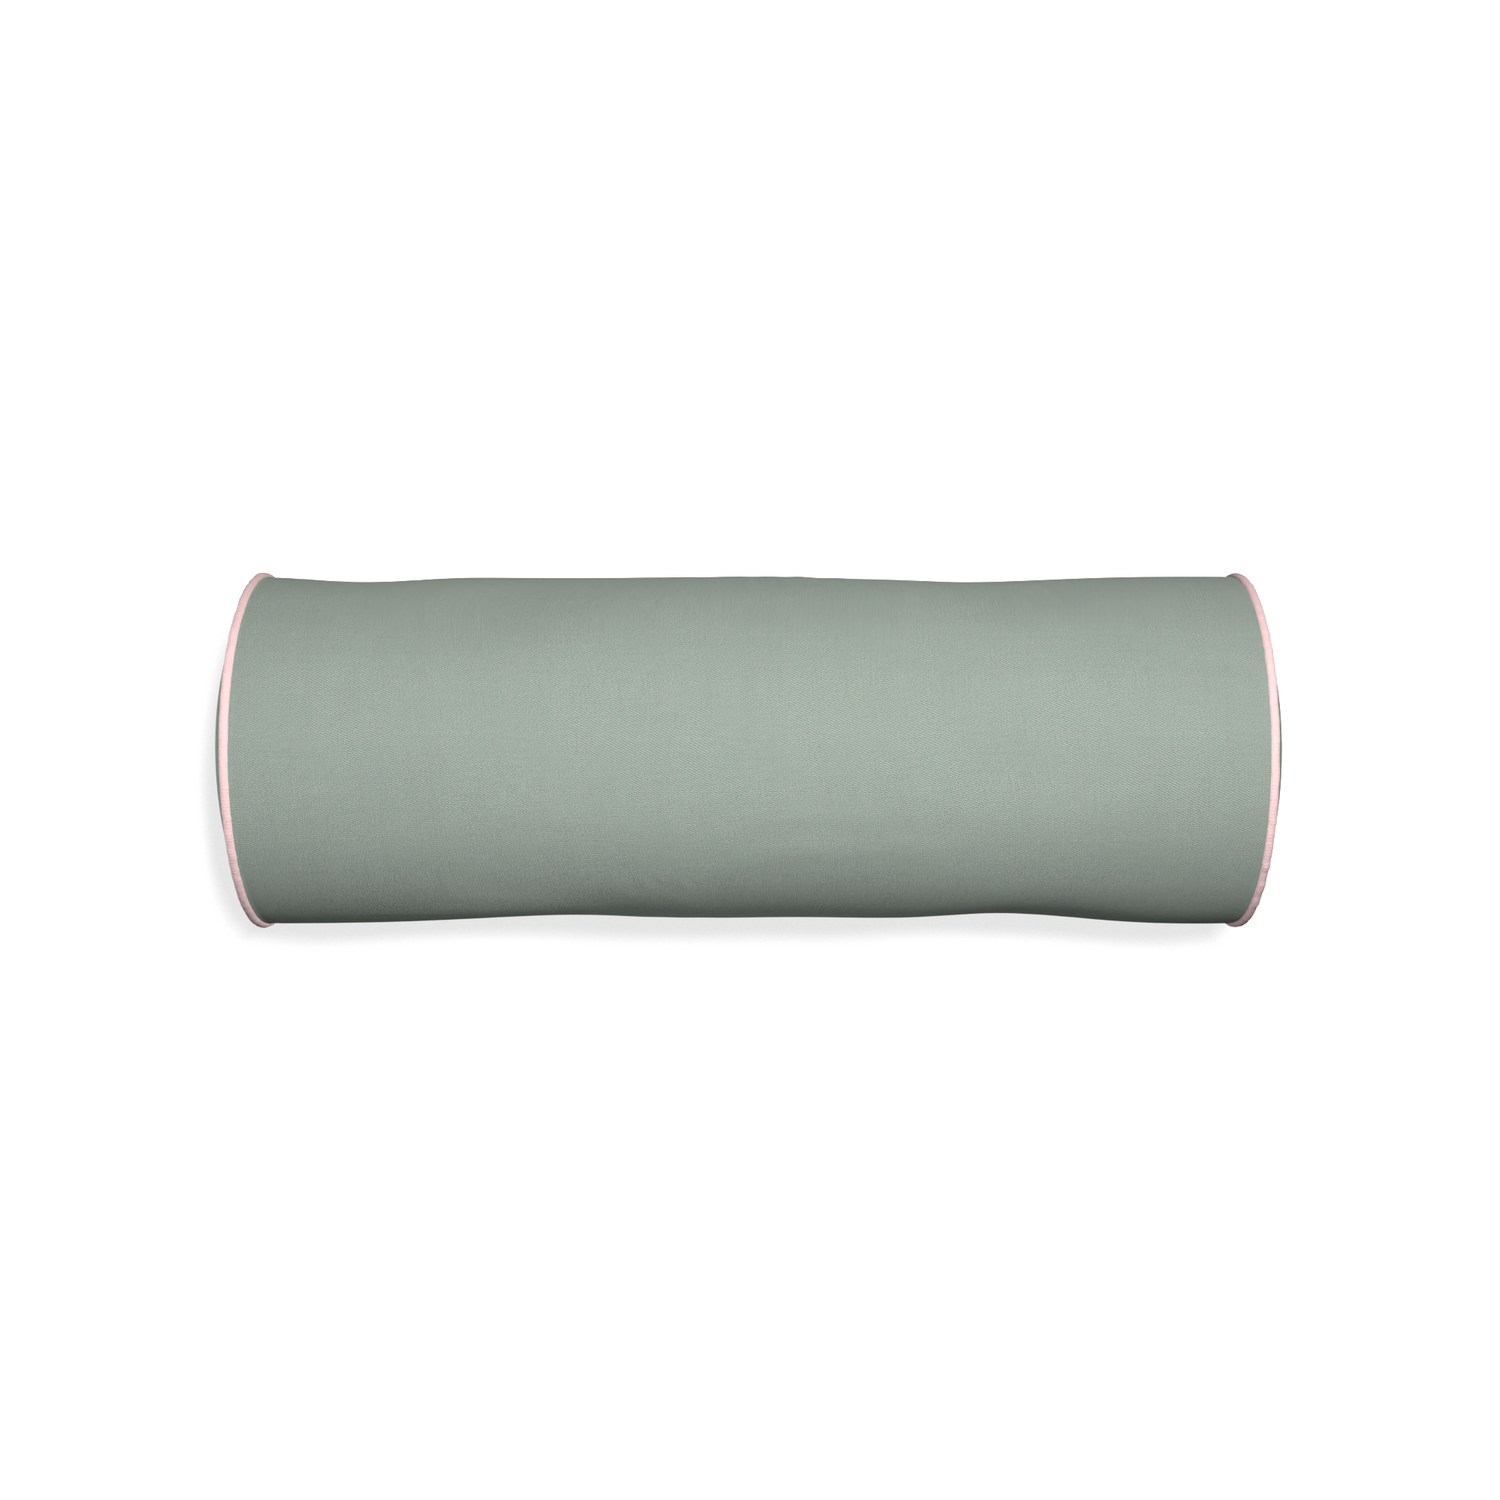 Bolster sage custom sage green cottonpillow with petal piping on white background